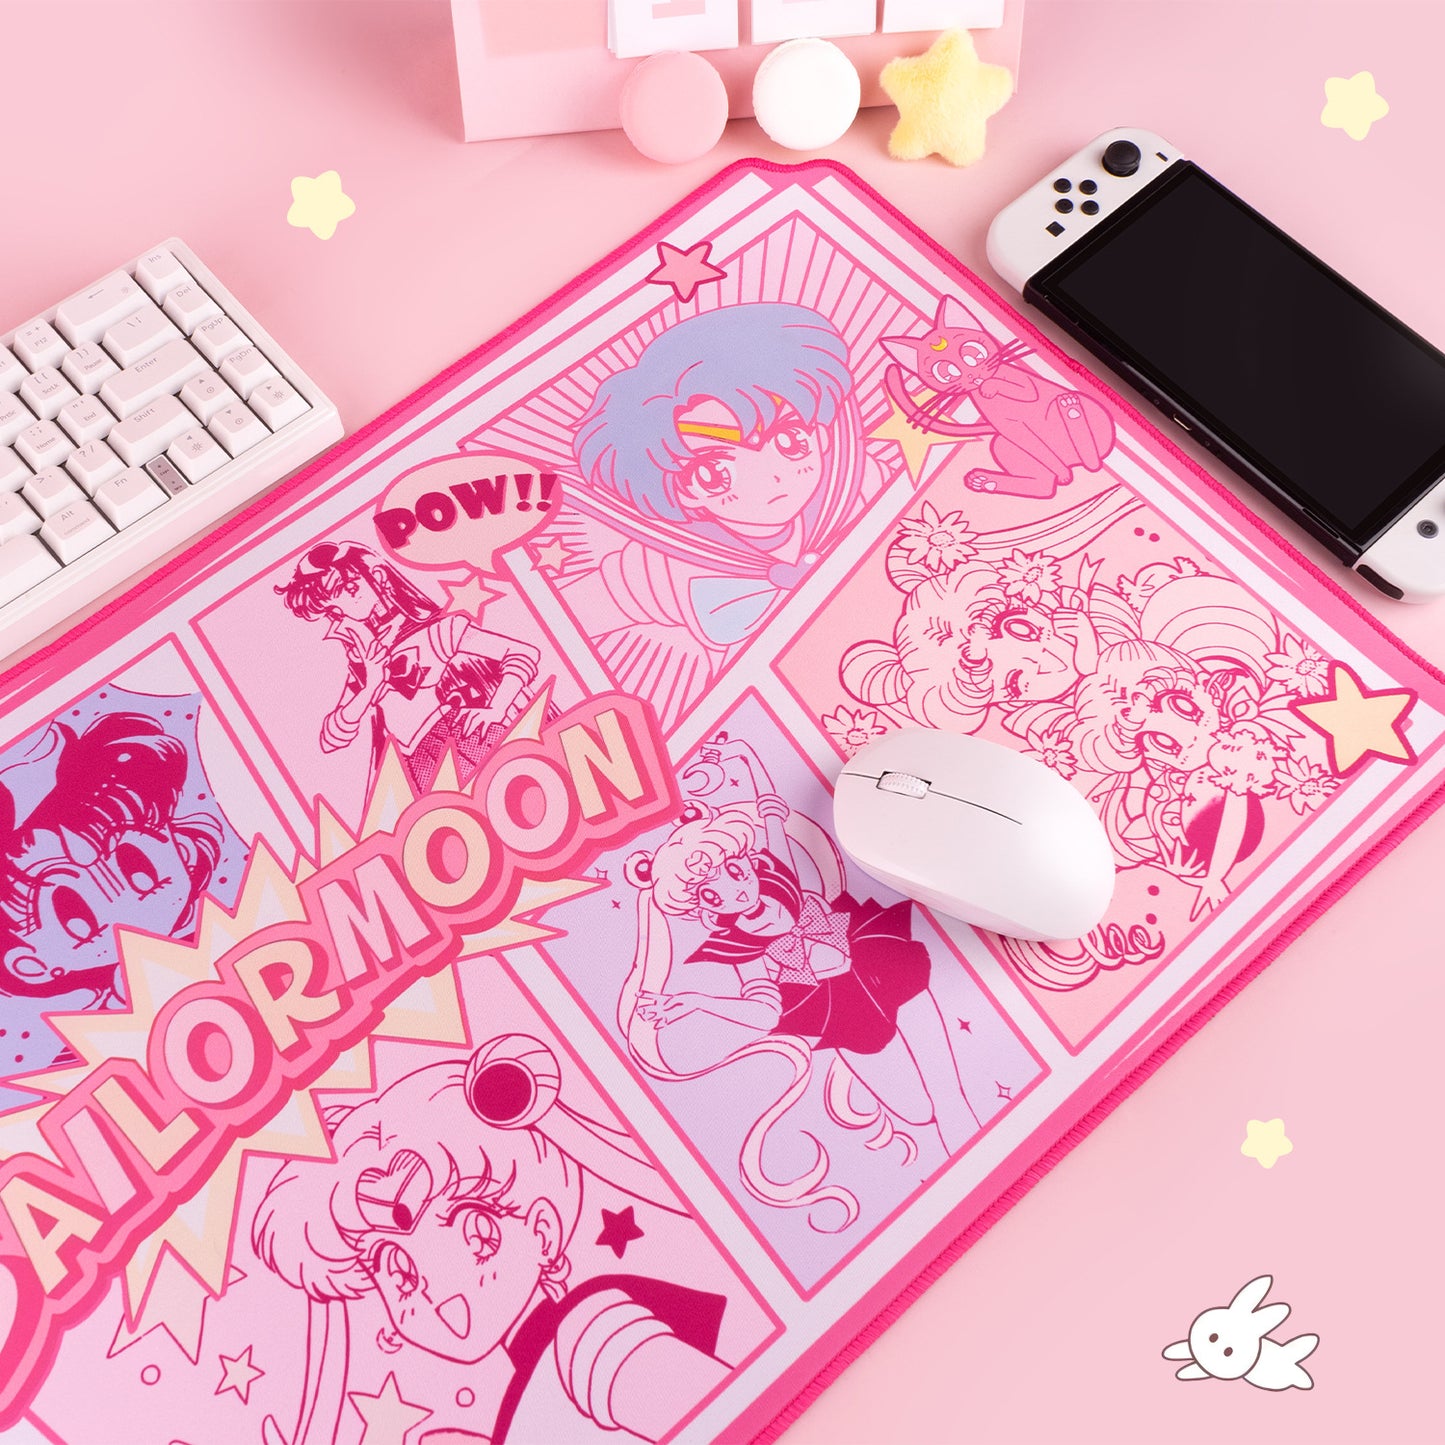 Kiloluv Sailormoon Large Mouse Pad, Cute Pink Desk Mat Protector for Office, Home, Gaming